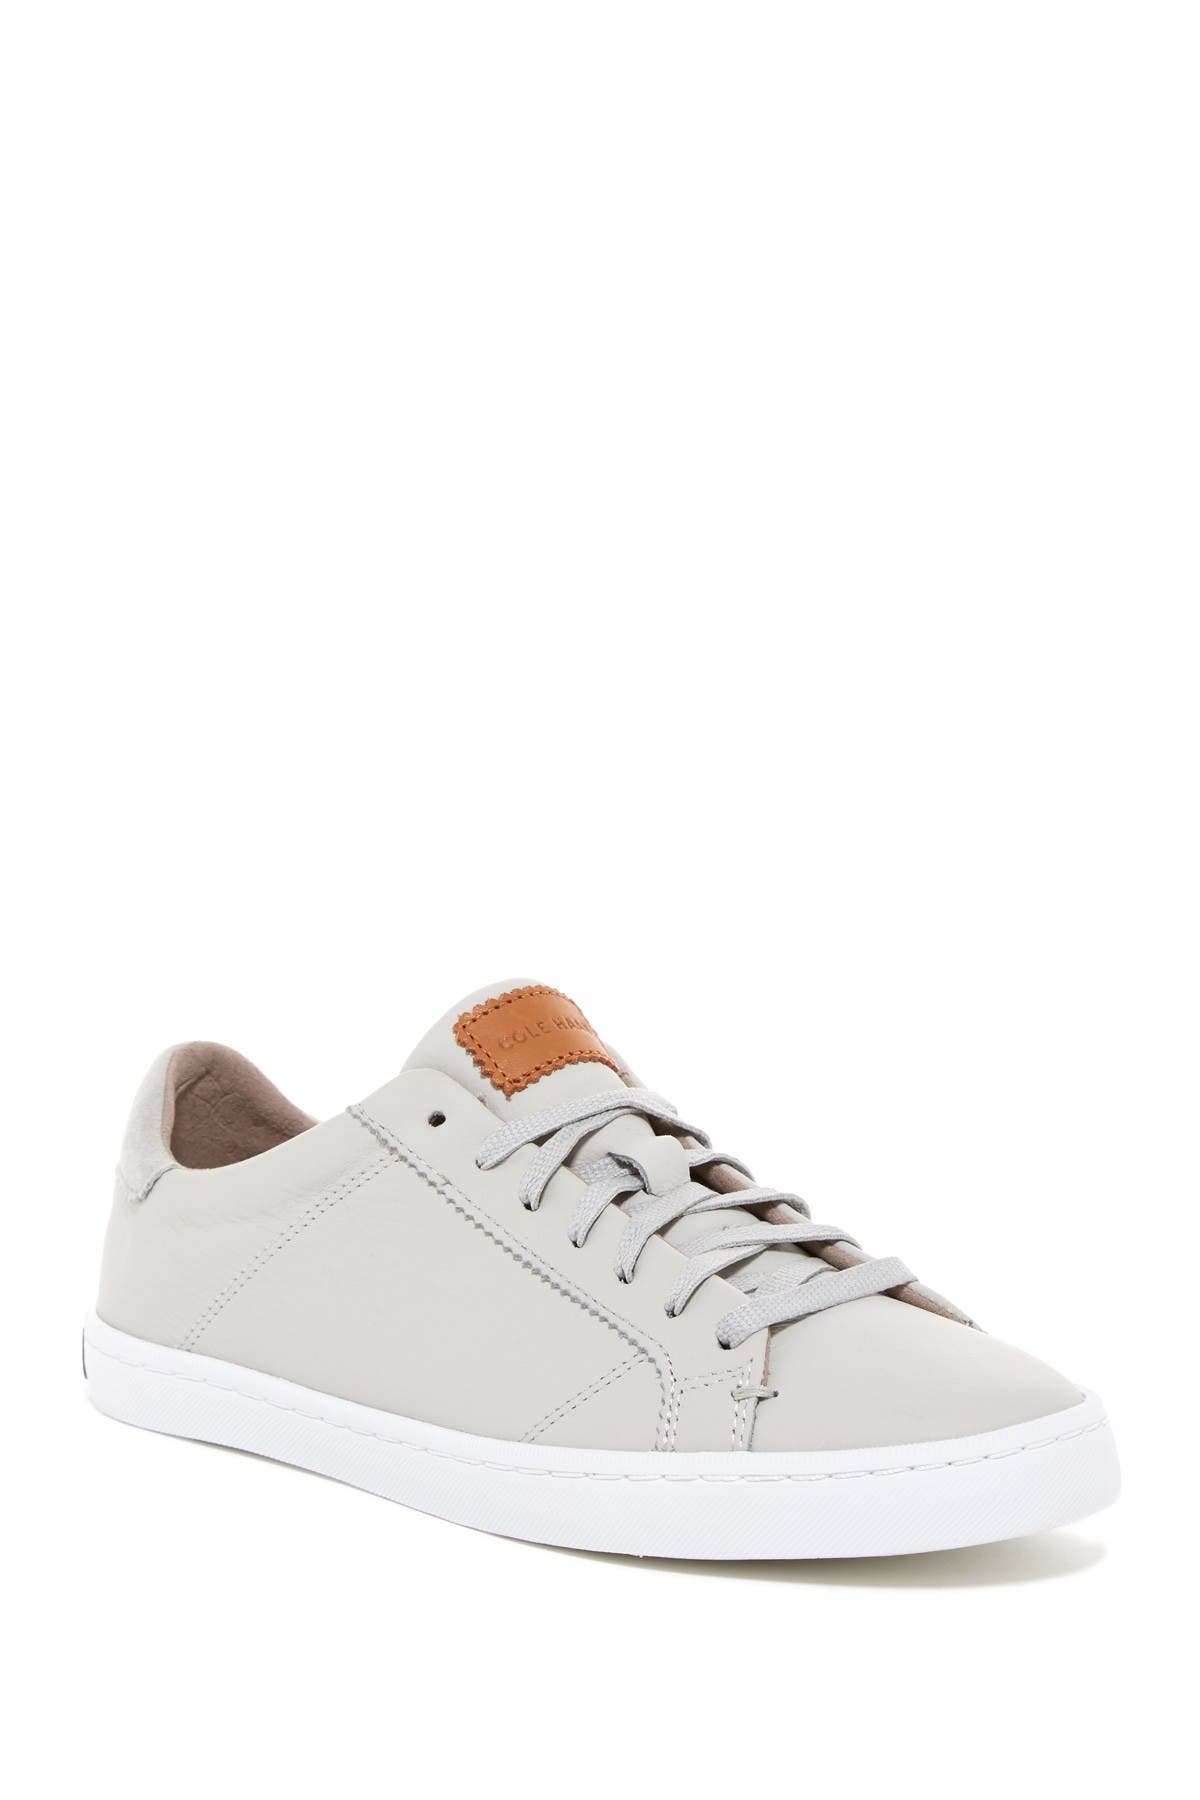 Cole Haan | Margo Lace-Up Sneaker 